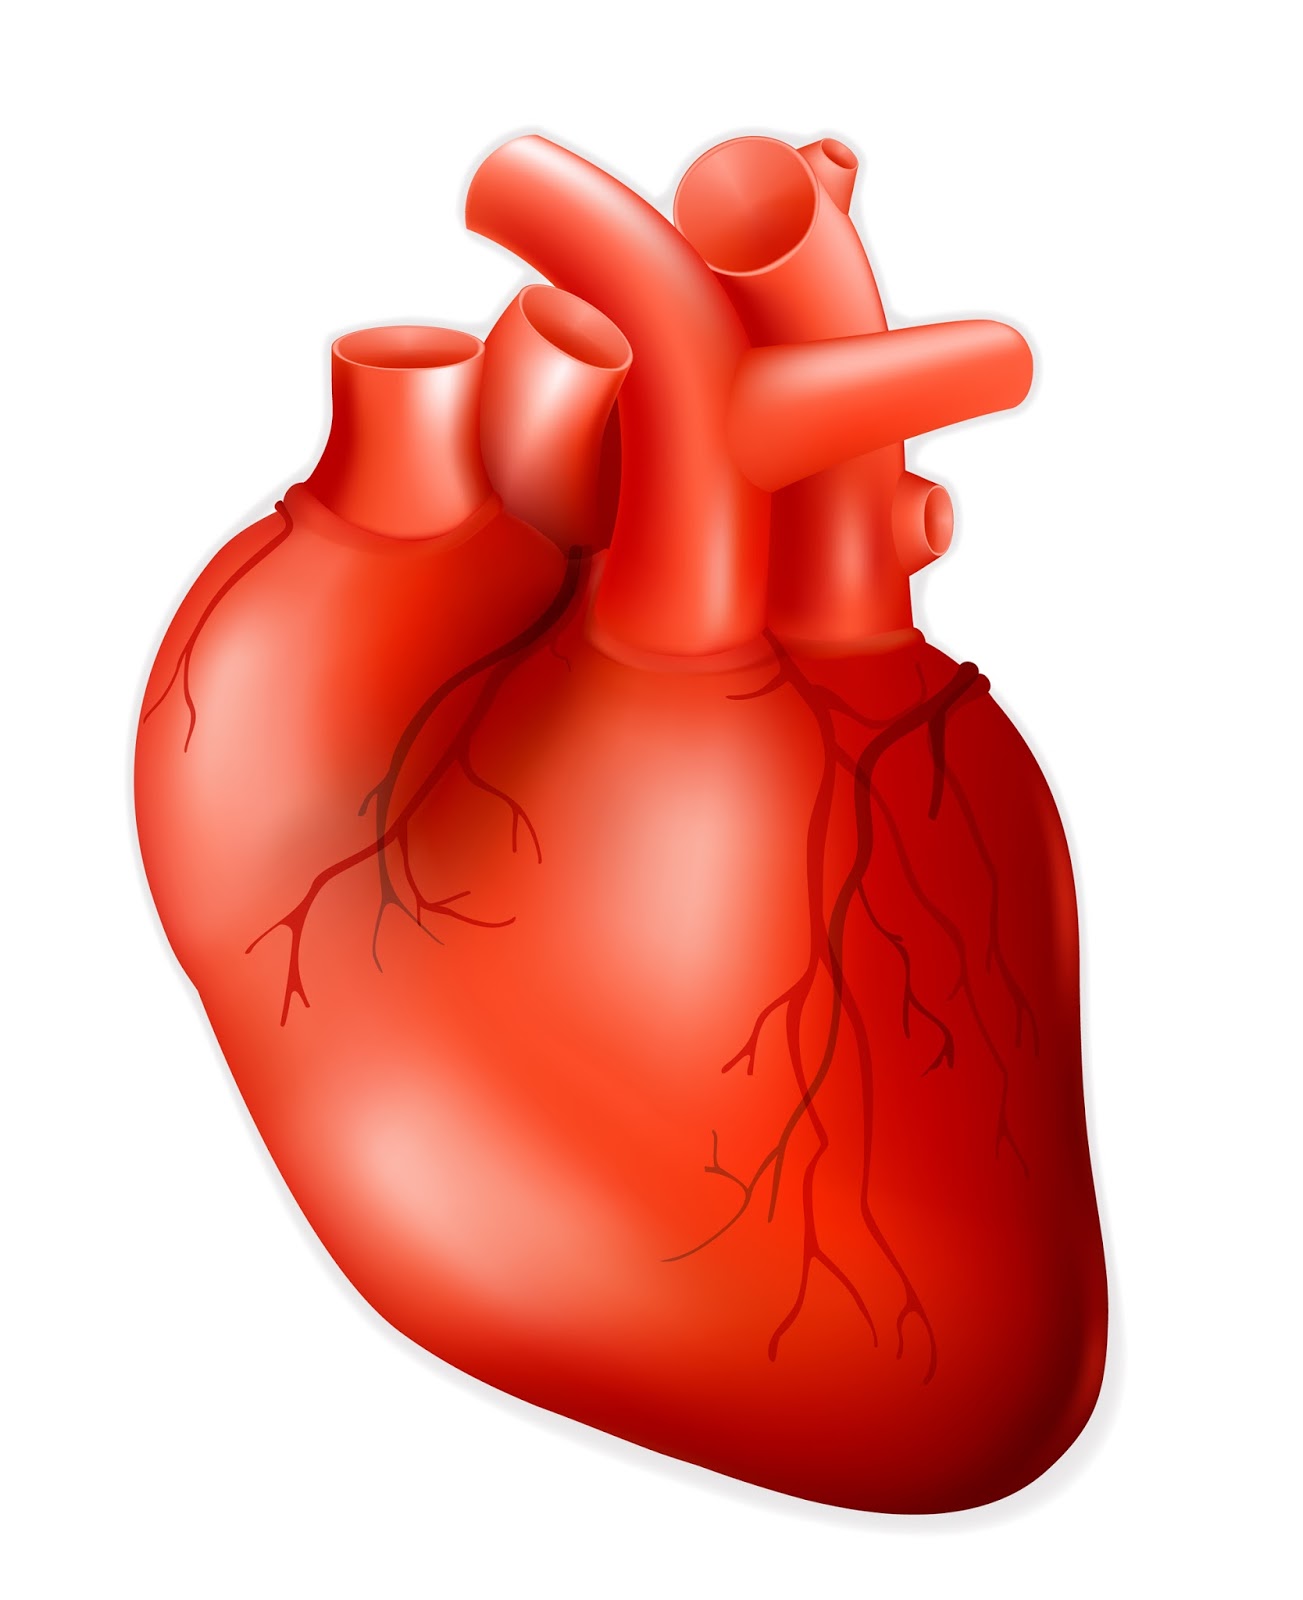 Real Heart Drawing | Free download on ClipArtMag